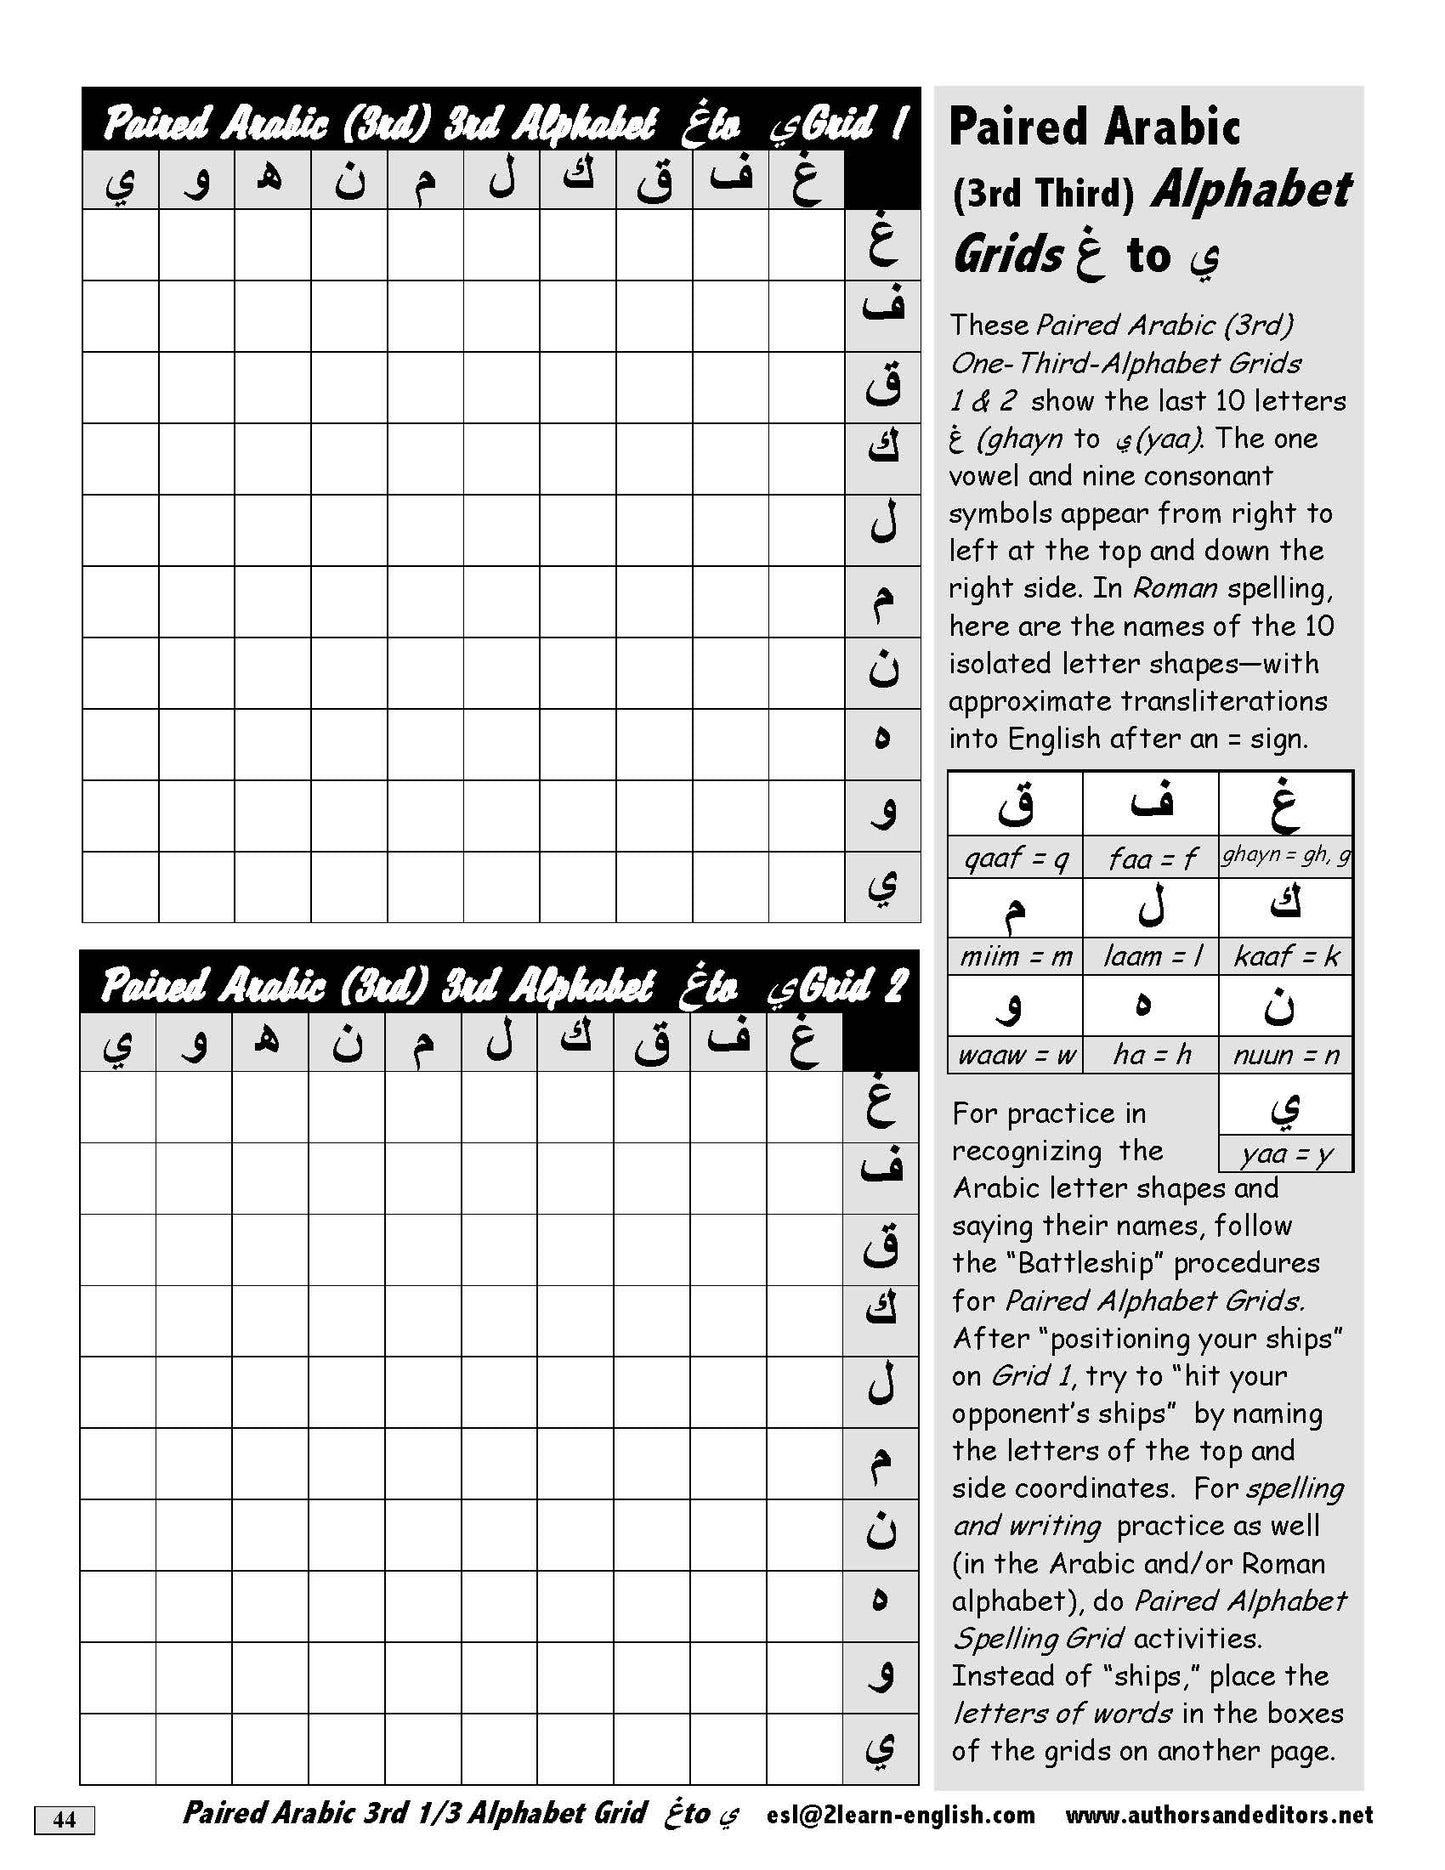 A-05.06: Use Alphabet-Letter Paired Grids with Arabic Characters